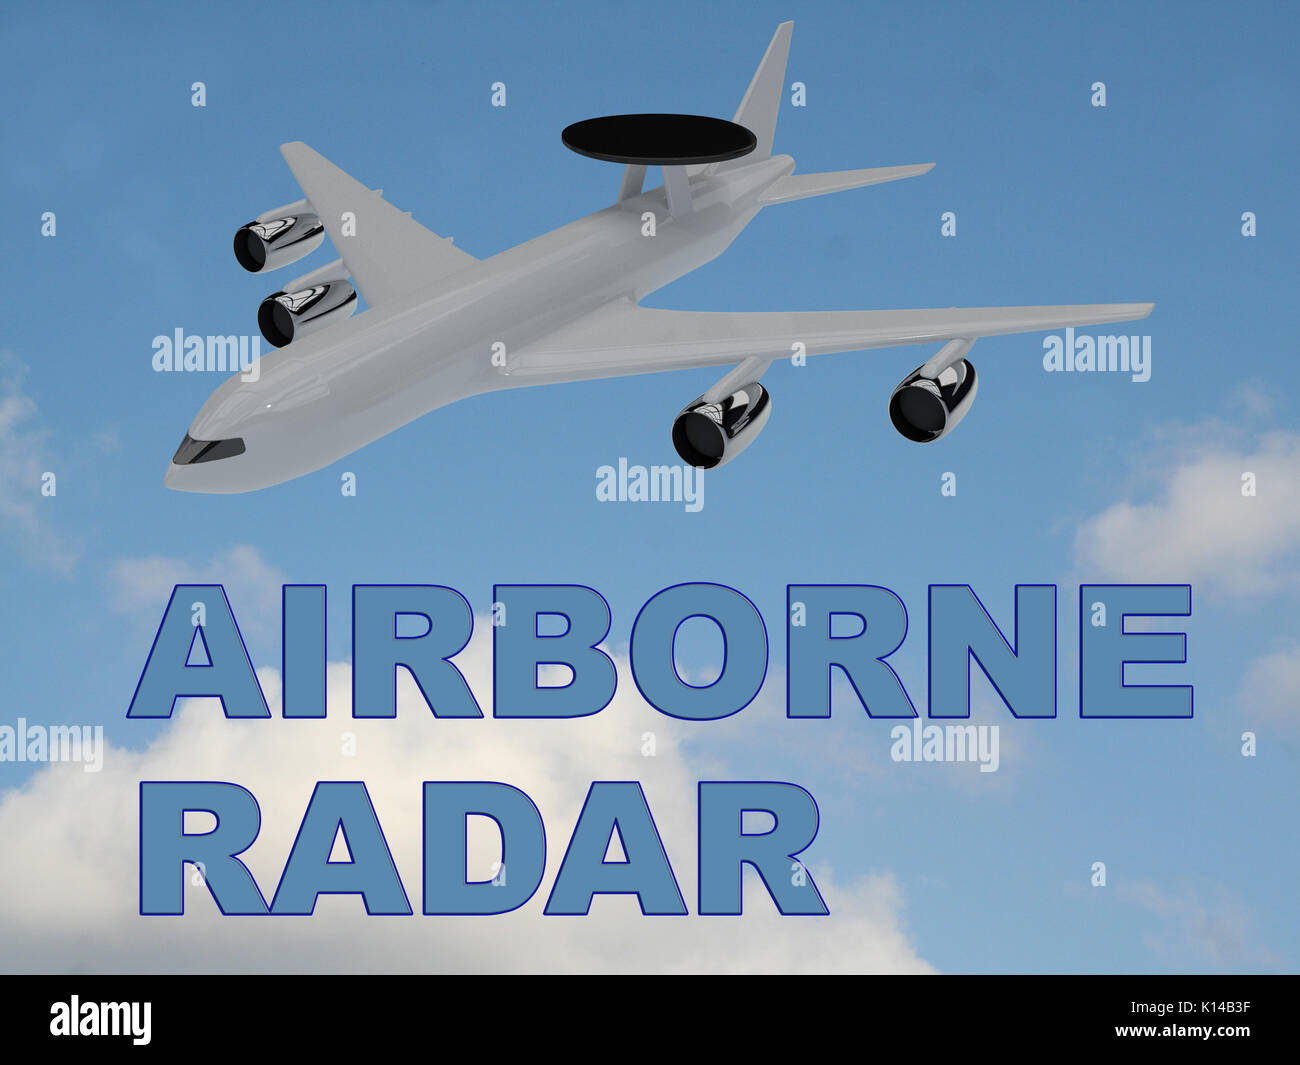 3D illustration of 'AIRBORNE RADAR' title on cloudy sky as a background, under an airplane with a round radar antena mounted upon it. Stock Photo